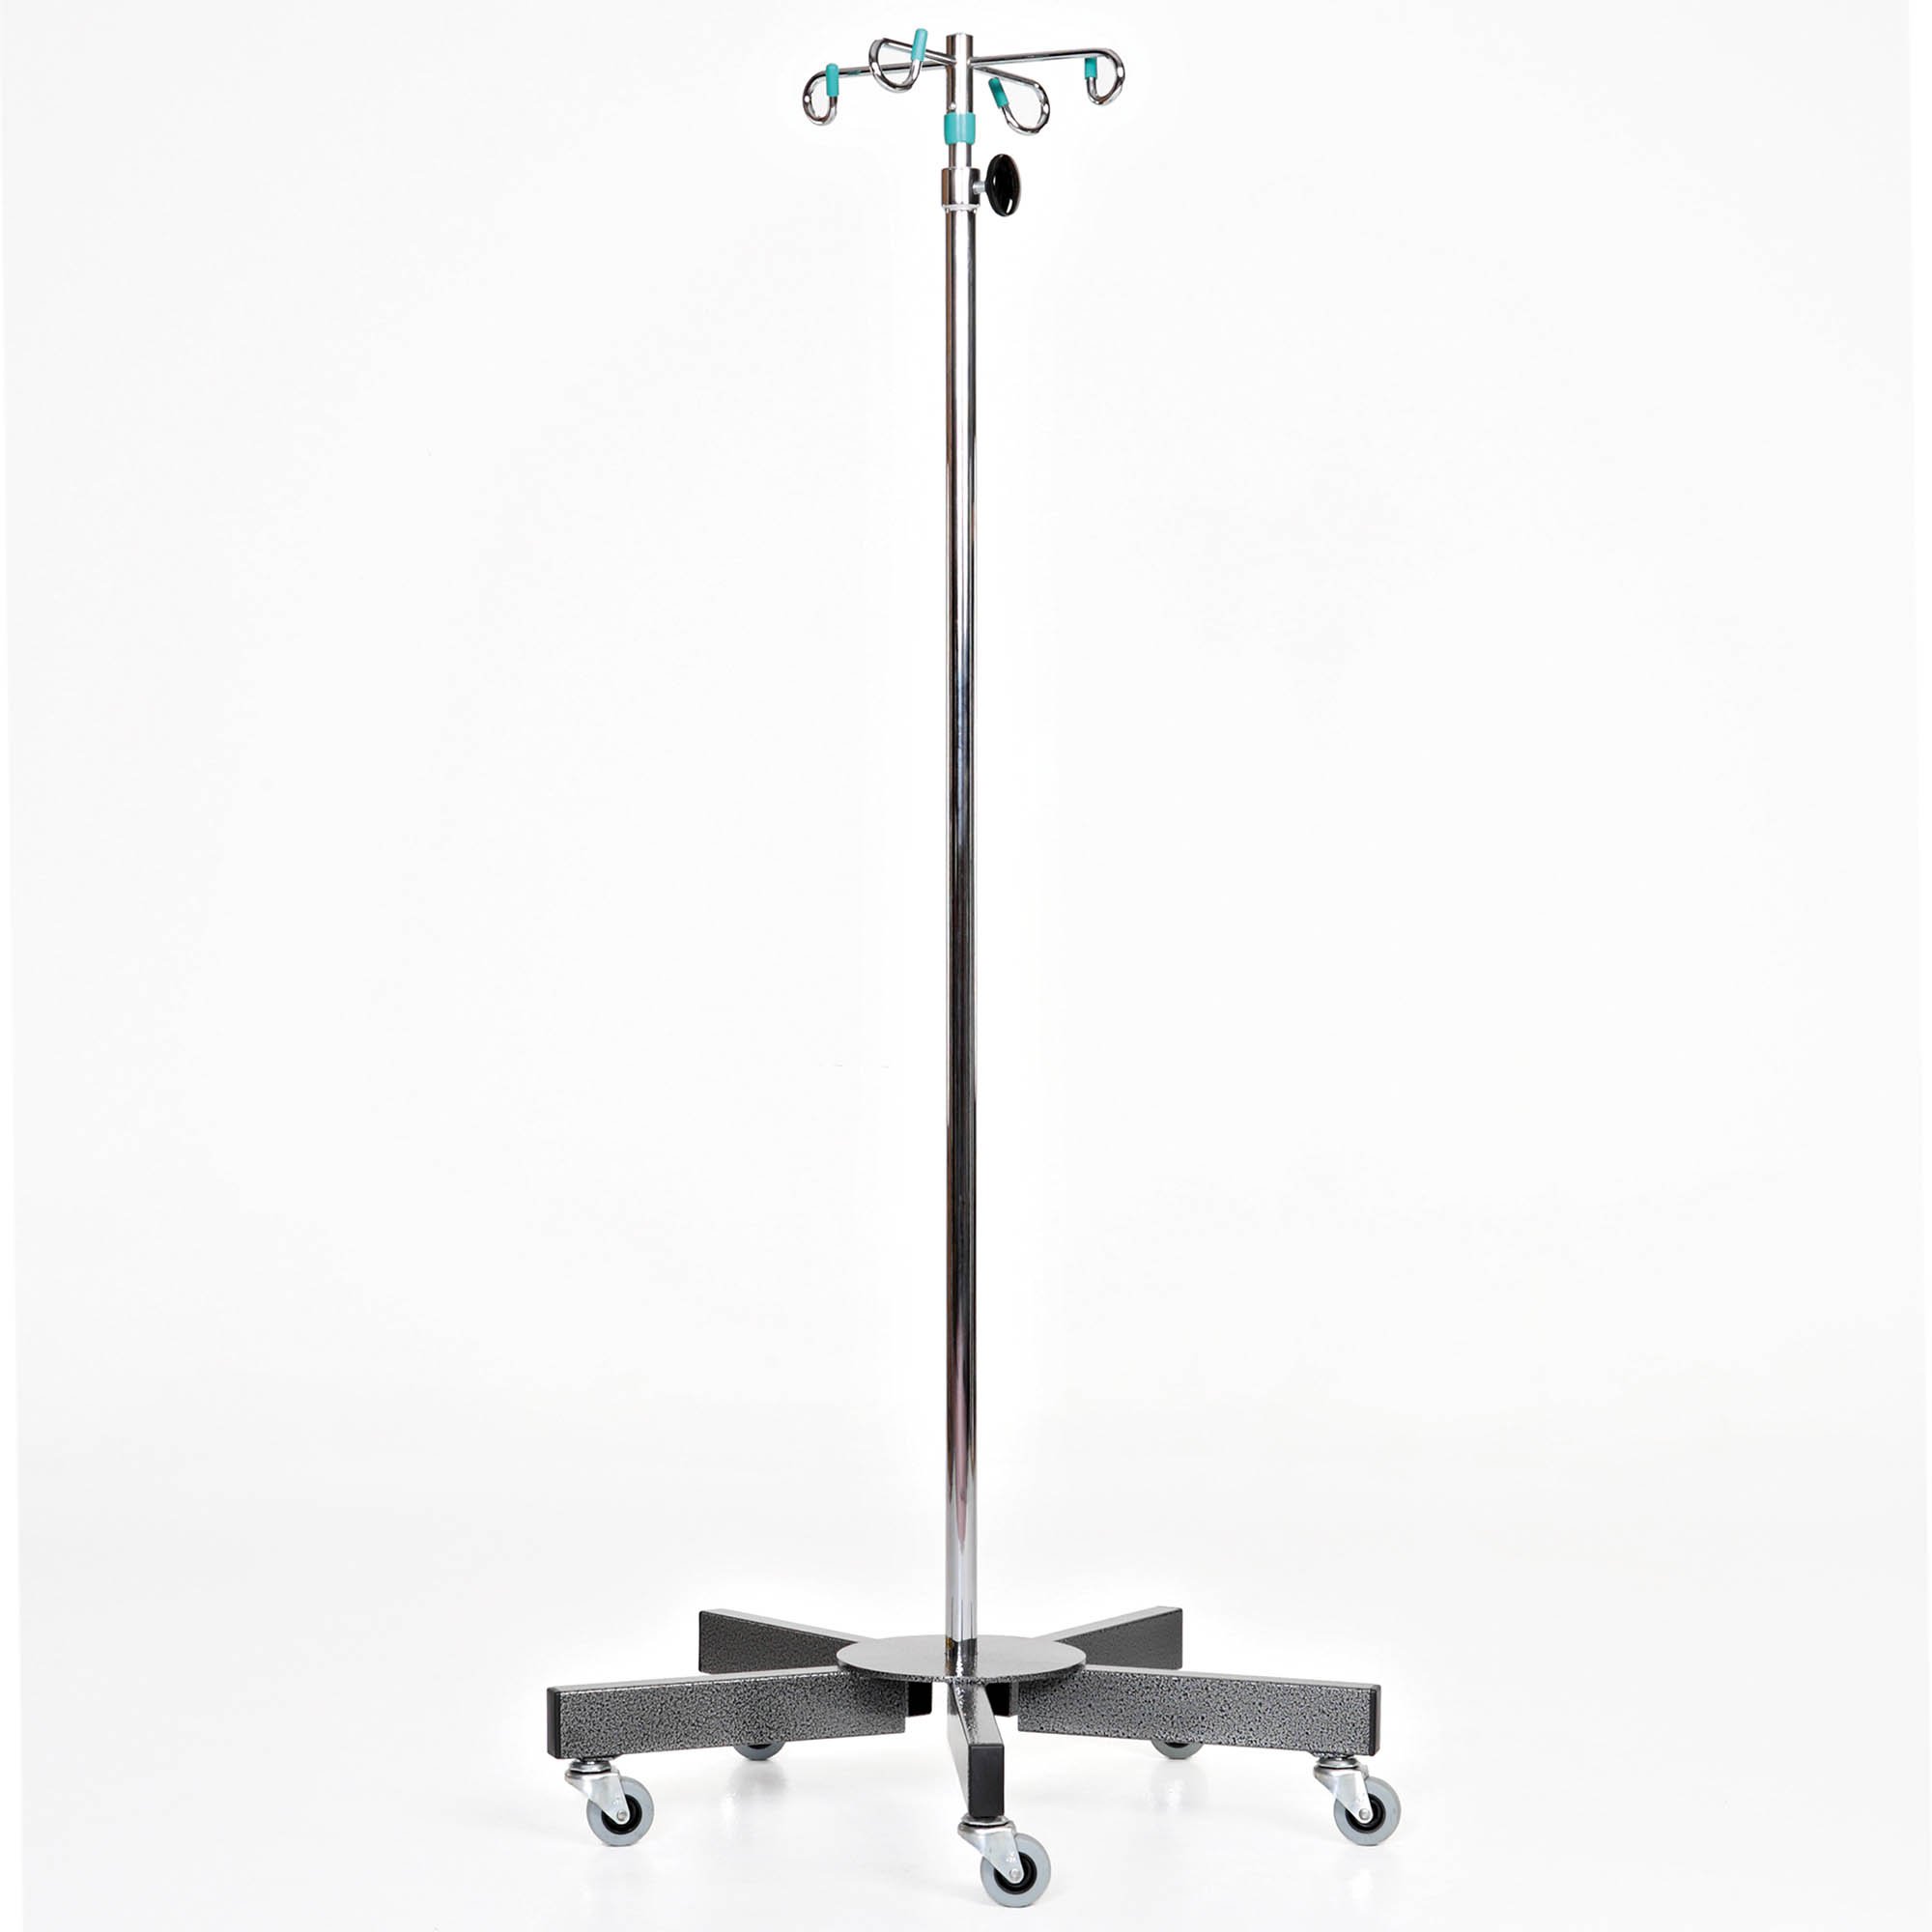 IV Pole, Stainless Steel IV Stand Pole Portable Infusion Stand IV Bag  Holder with 2 Hooks for Hospital and Home, Adjustable Height